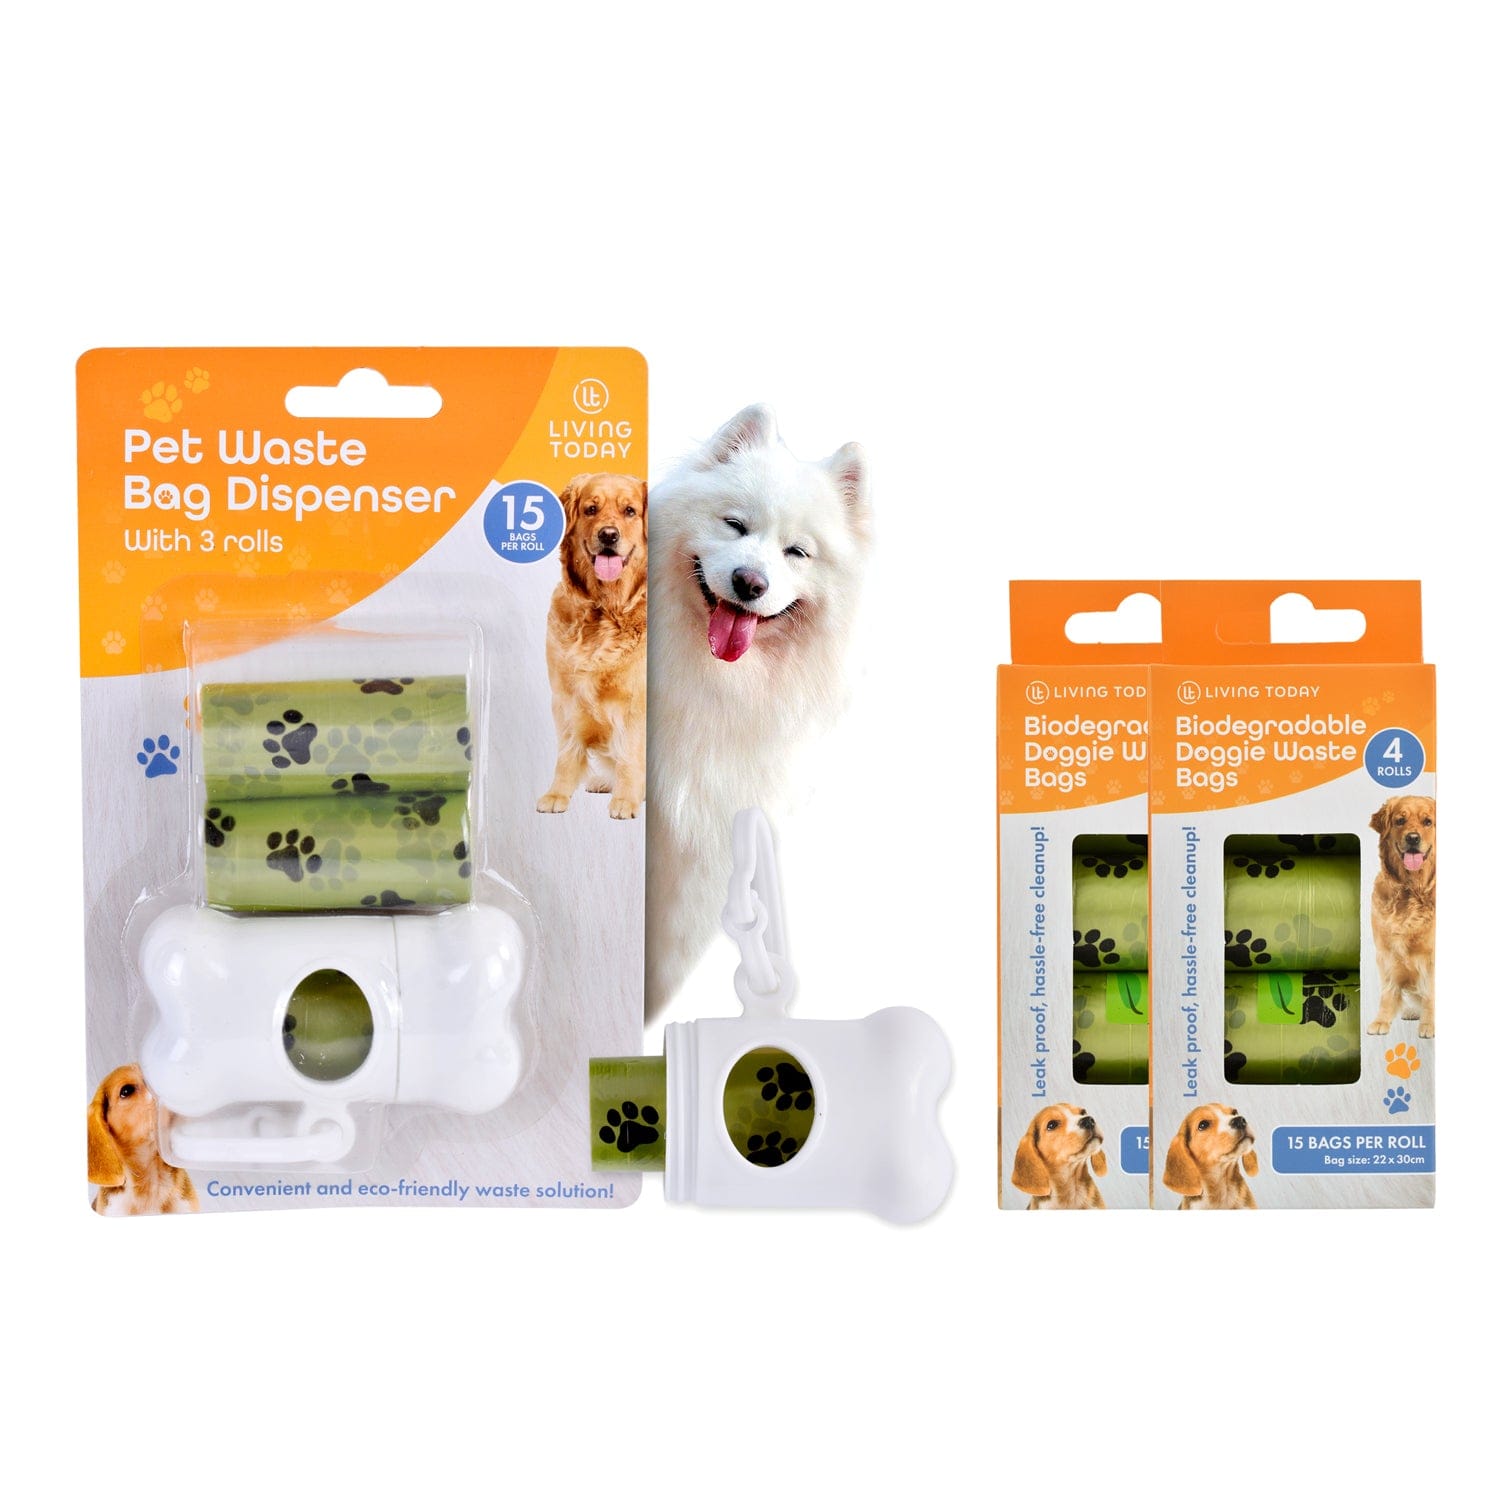 LIVINGTODAY dog poop dispenser and bags LIVINGTODAY Pet Dog Poop Dispenser and 165 Biodegradable Unscented Waste Bags